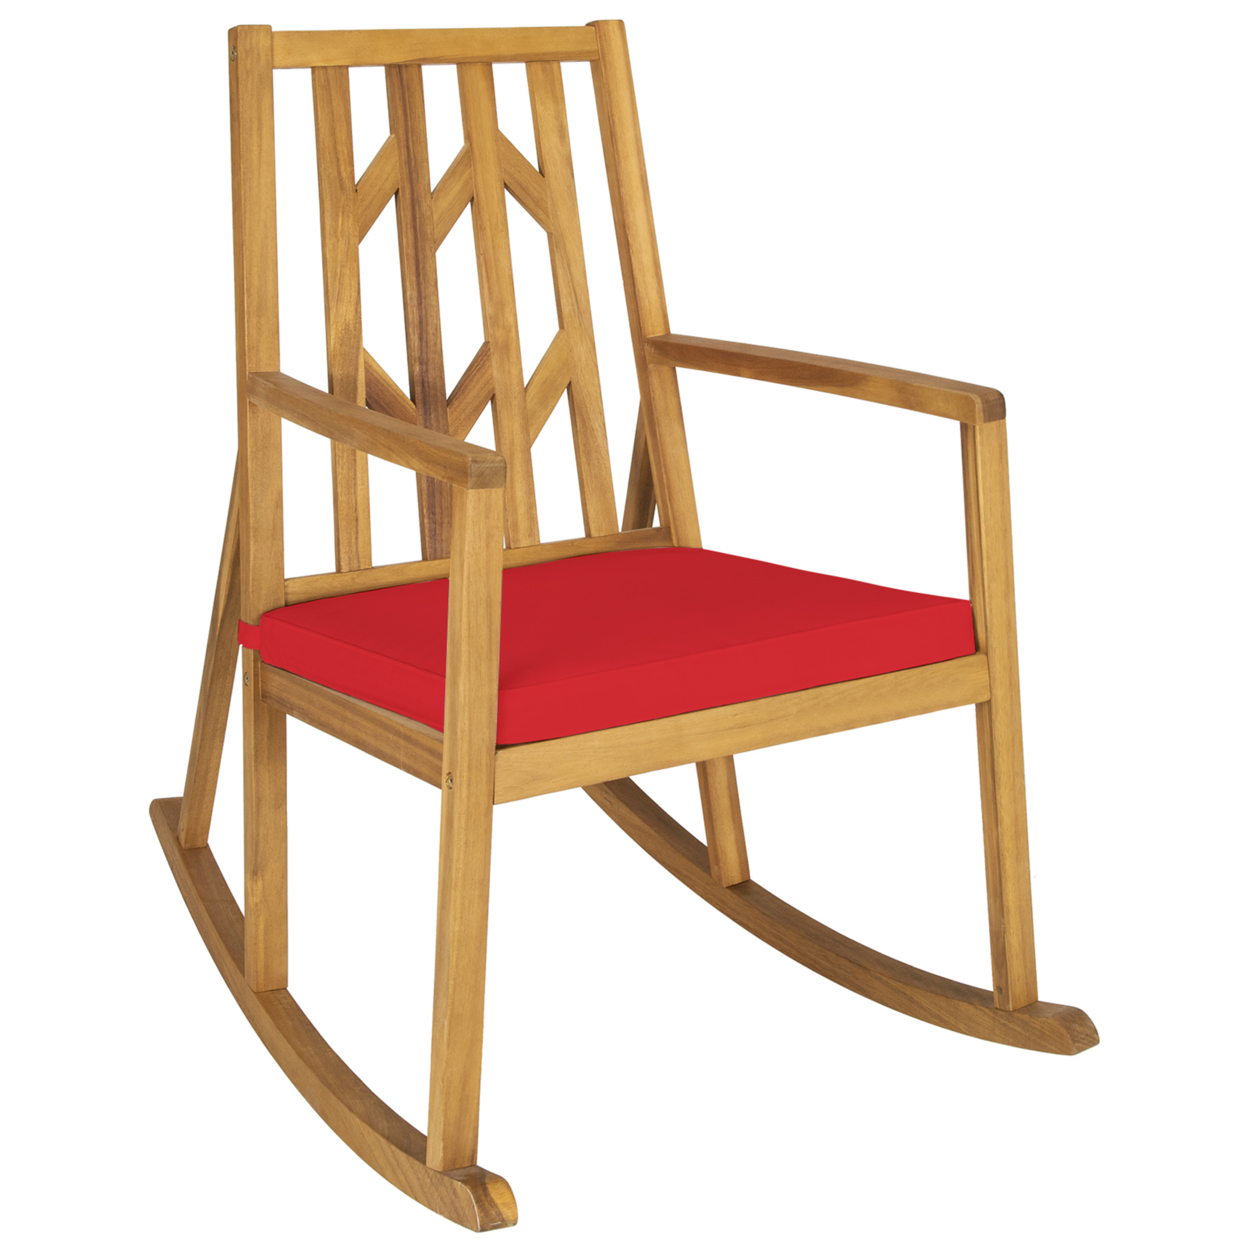 Outdoor Acacia Wood Rocking Chair Wooden Patio Rocker W/ Red Cushion